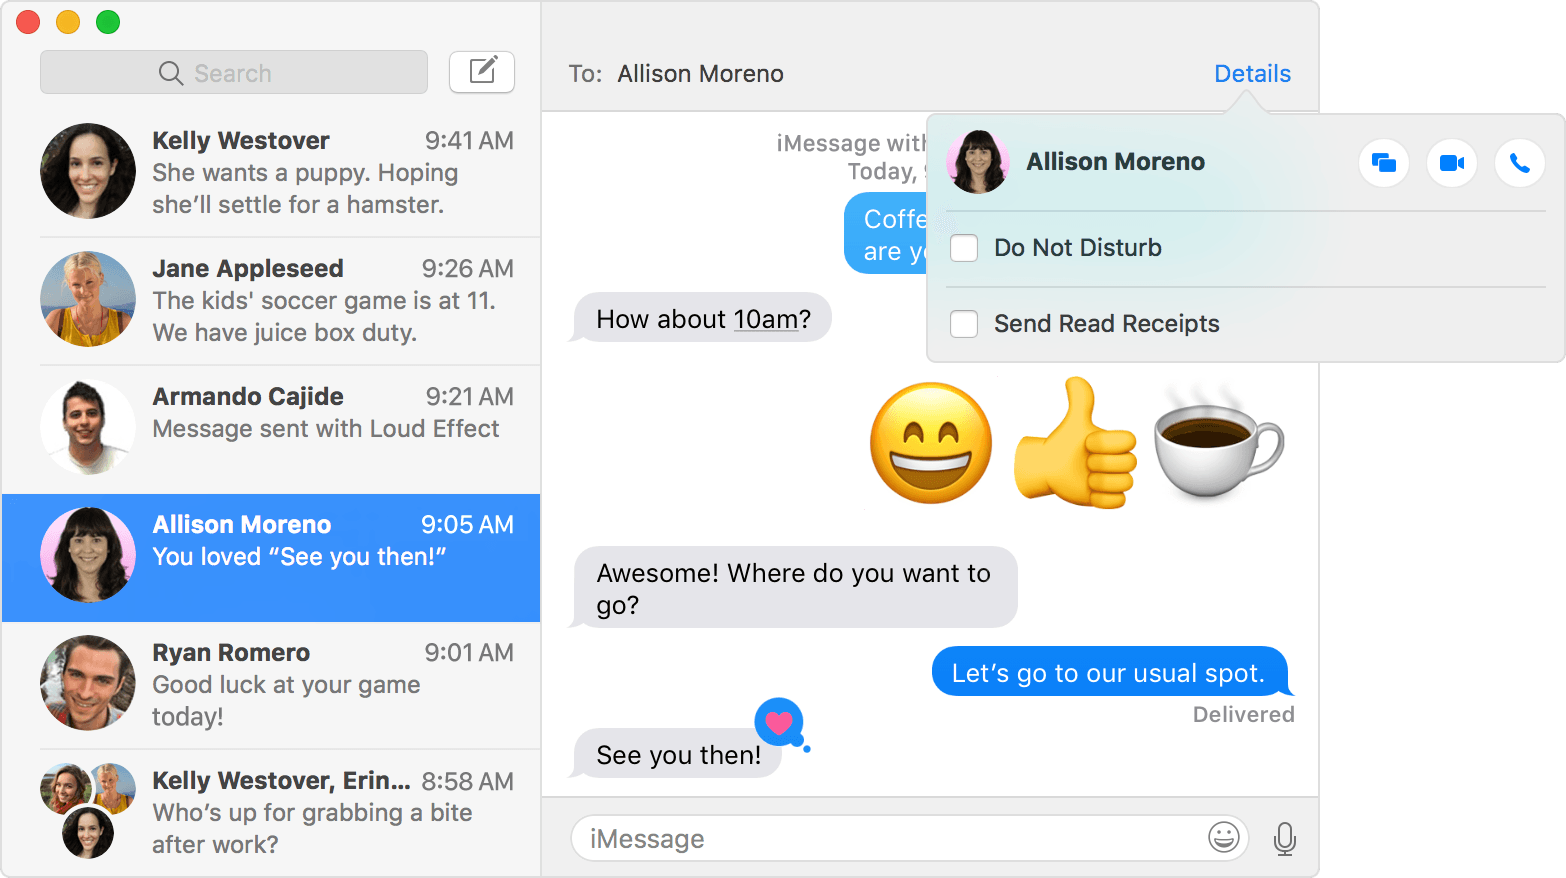 imessage and facetime not working on macbook pro sierra